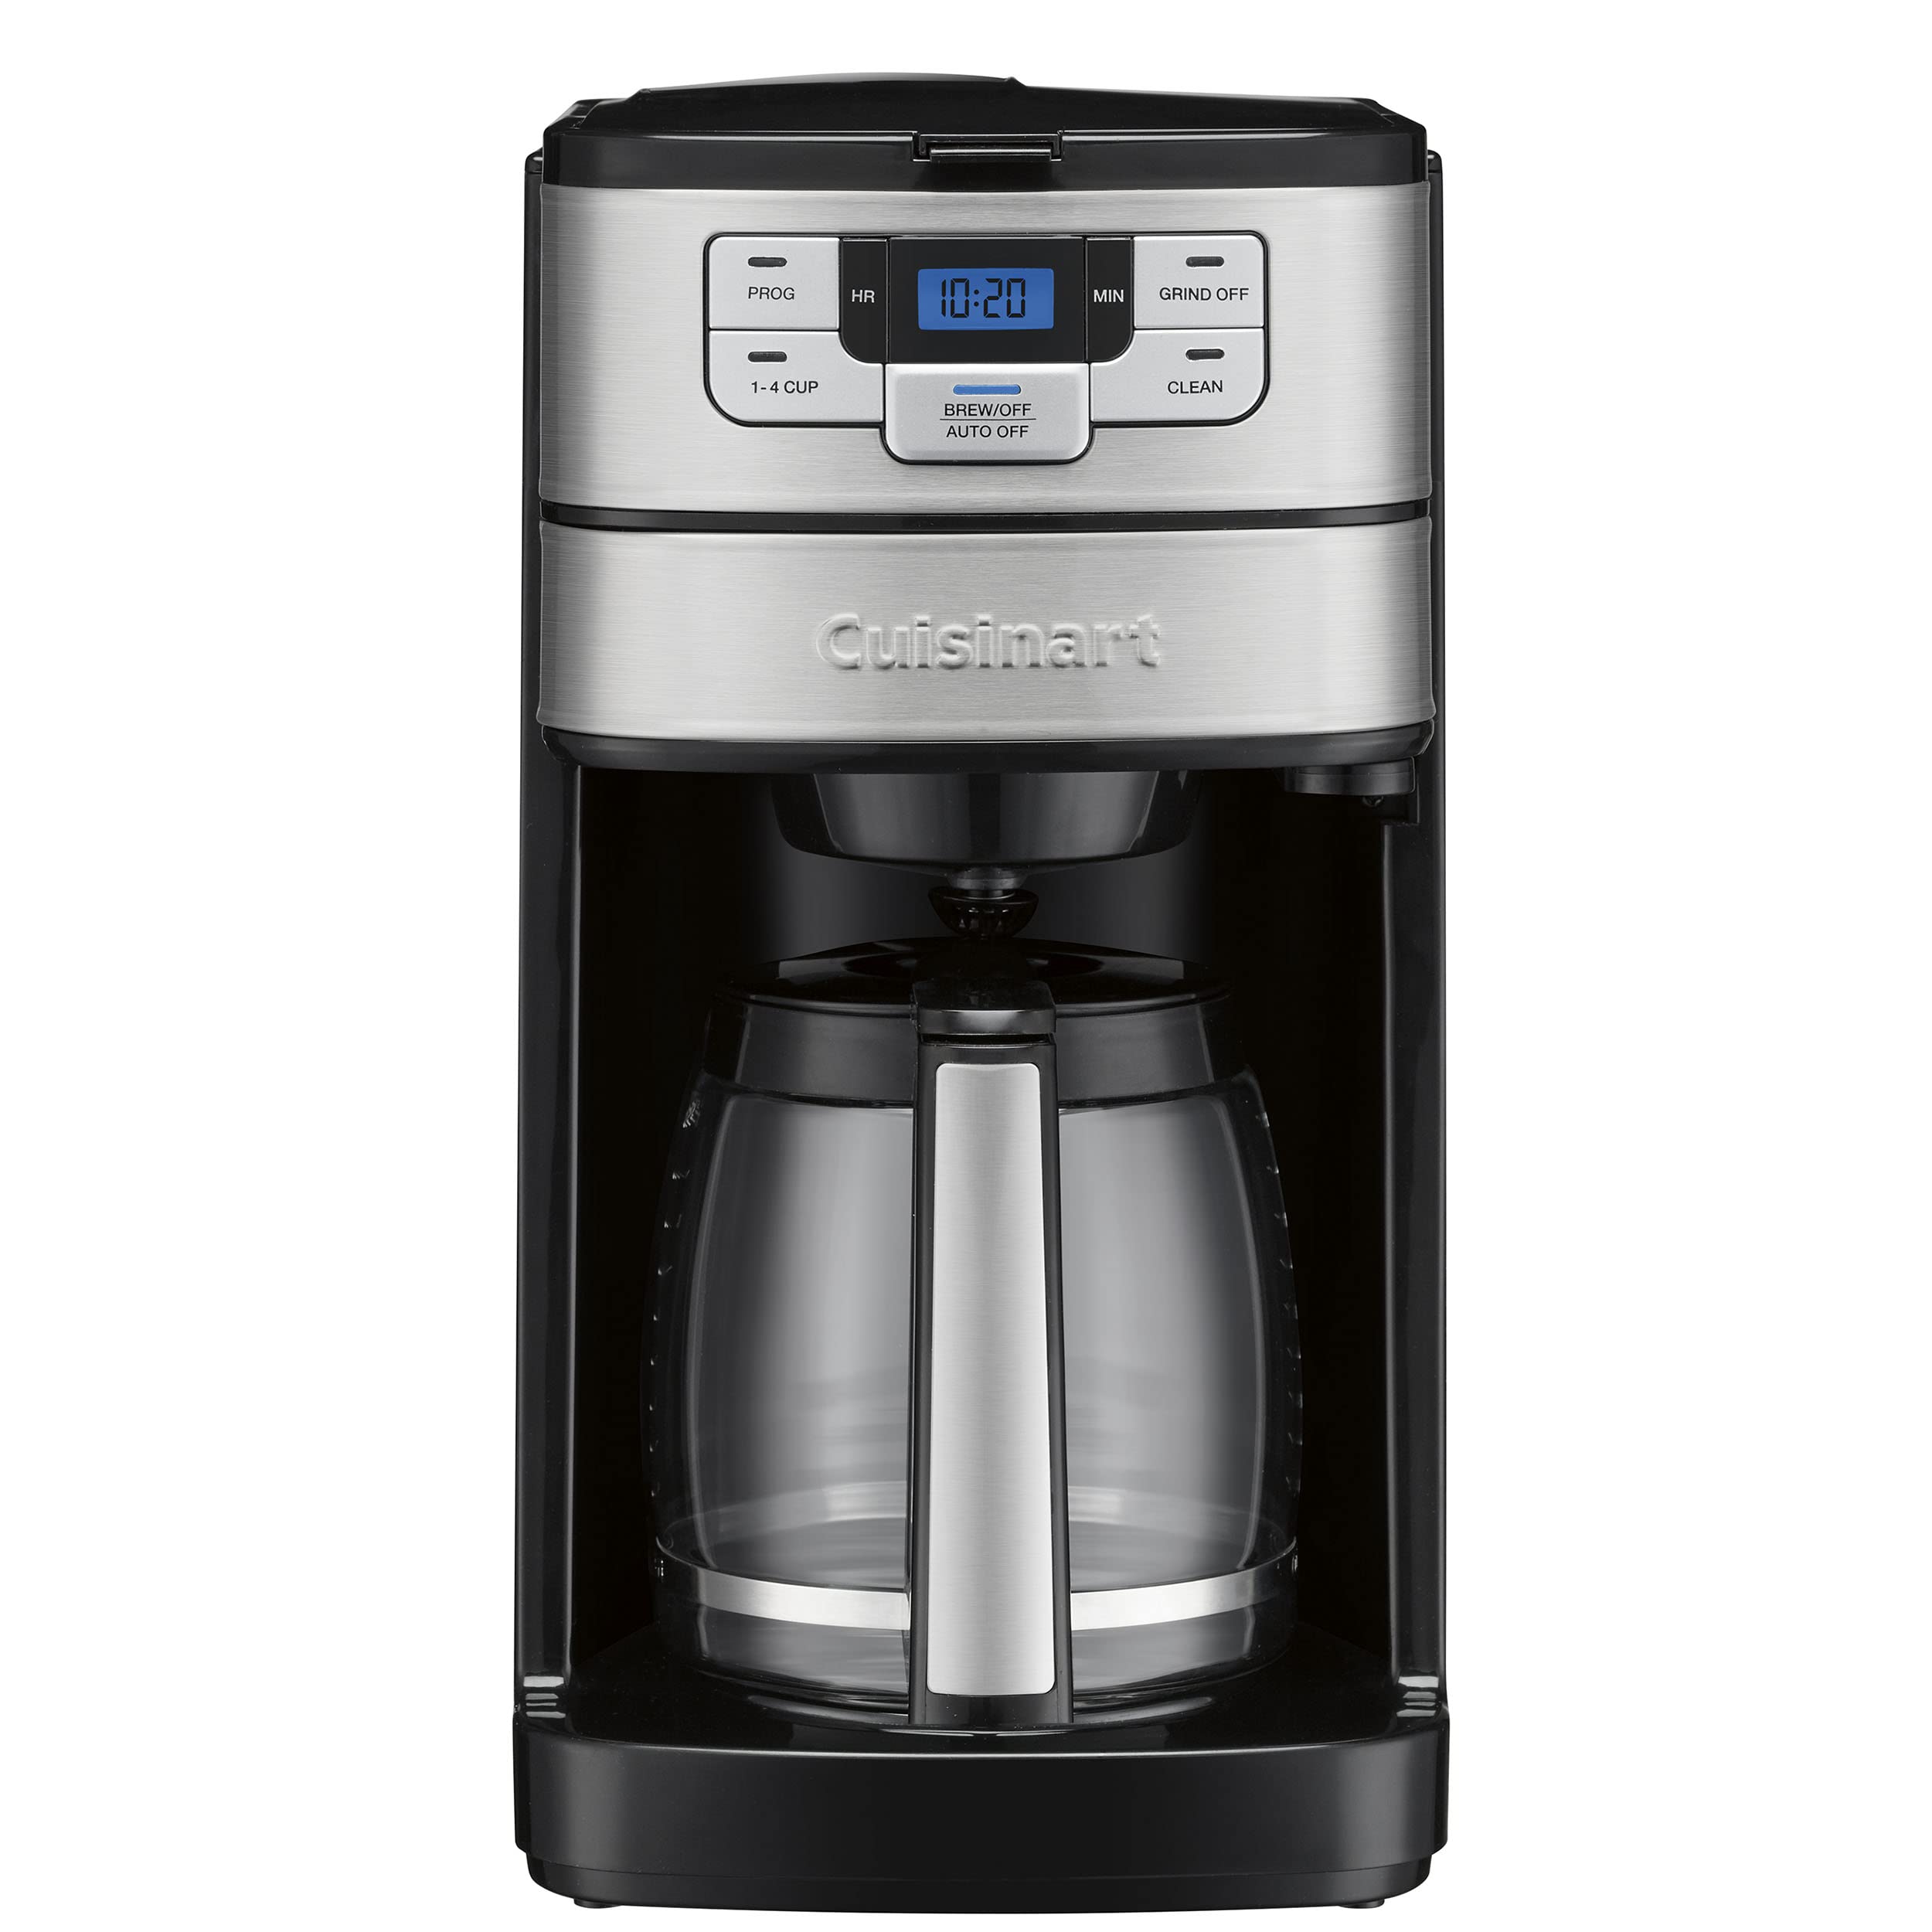 Cuisinart DGB-400SSFR Grind and Brew 12 Cup Coffeemaker - Silver (Renewed)